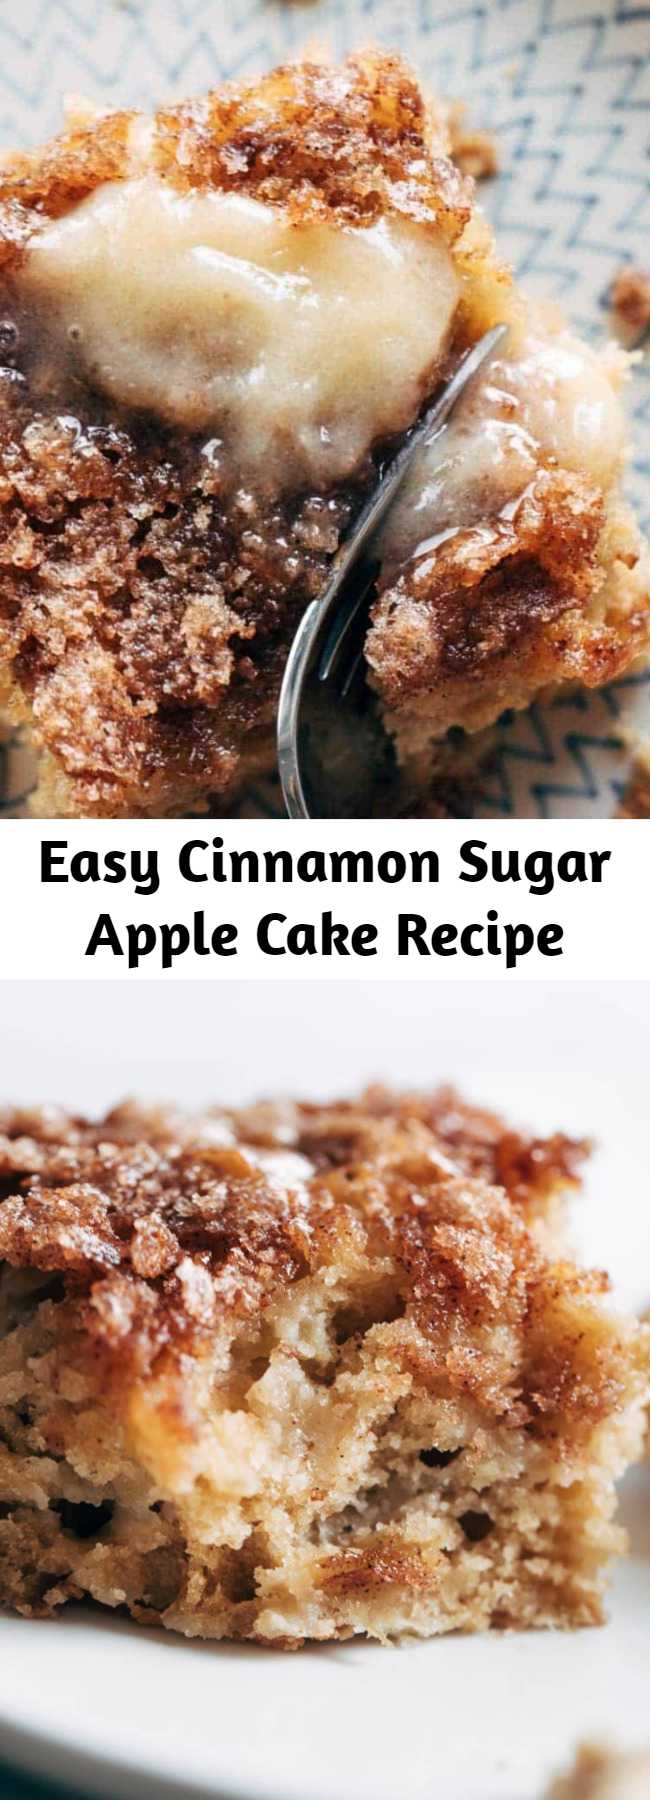 Easy Cinnamon Sugar Apple Cake Recipe - This simple cinnamon sugar apple cake is light and fluffy, loaded with fresh apples, and topped with a crunchy cinnamon sugar layer! #cake #apple #dessert #baking #recipe